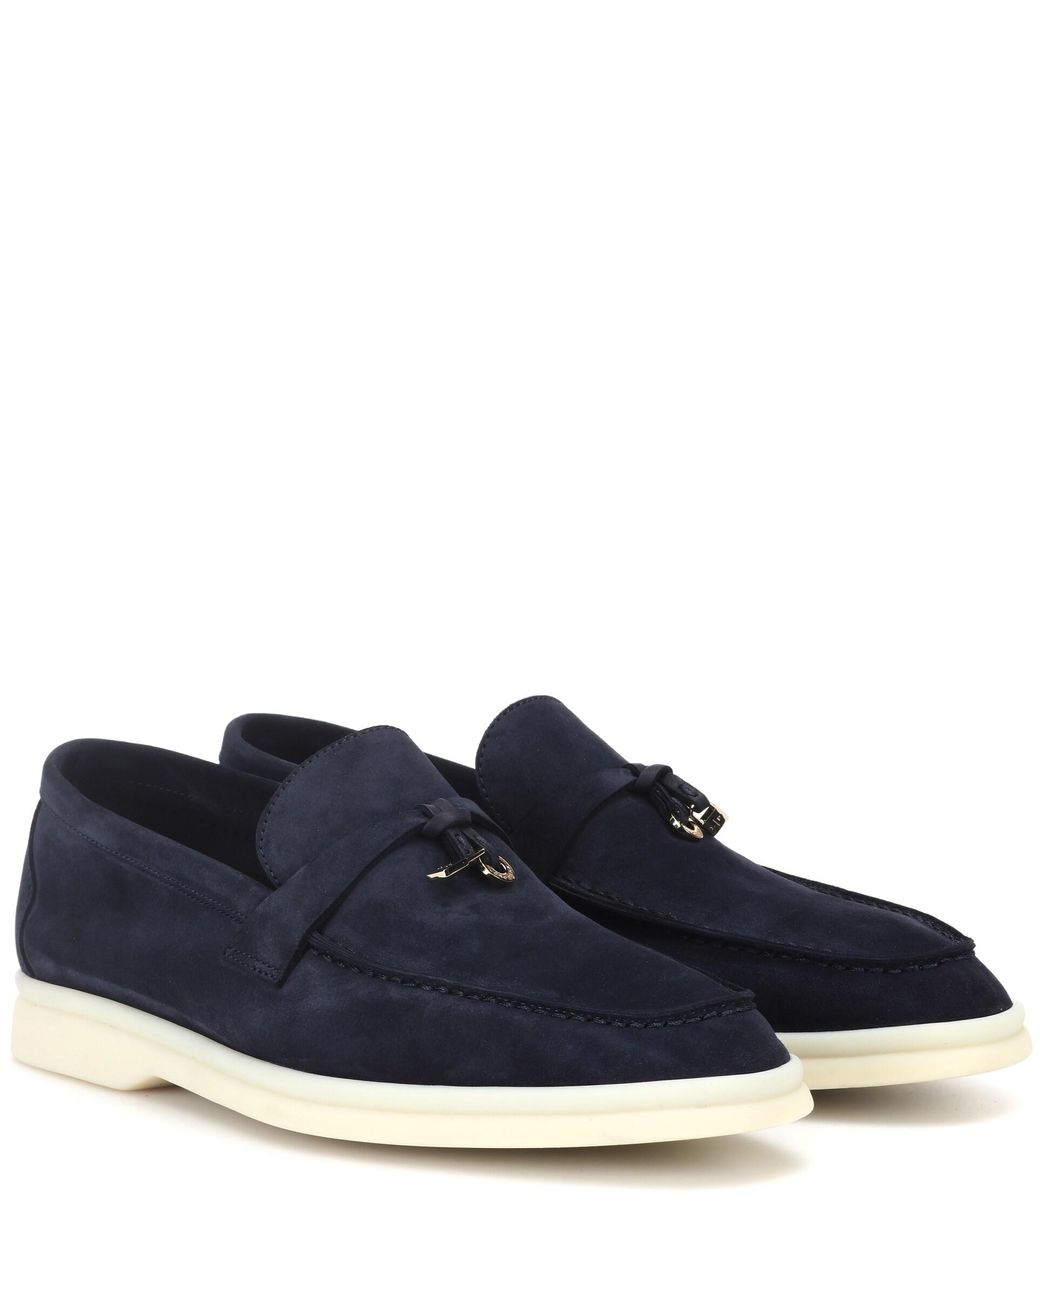 Loro Piana Summer Charms Walk Suede Loafers in Blue | Lyst